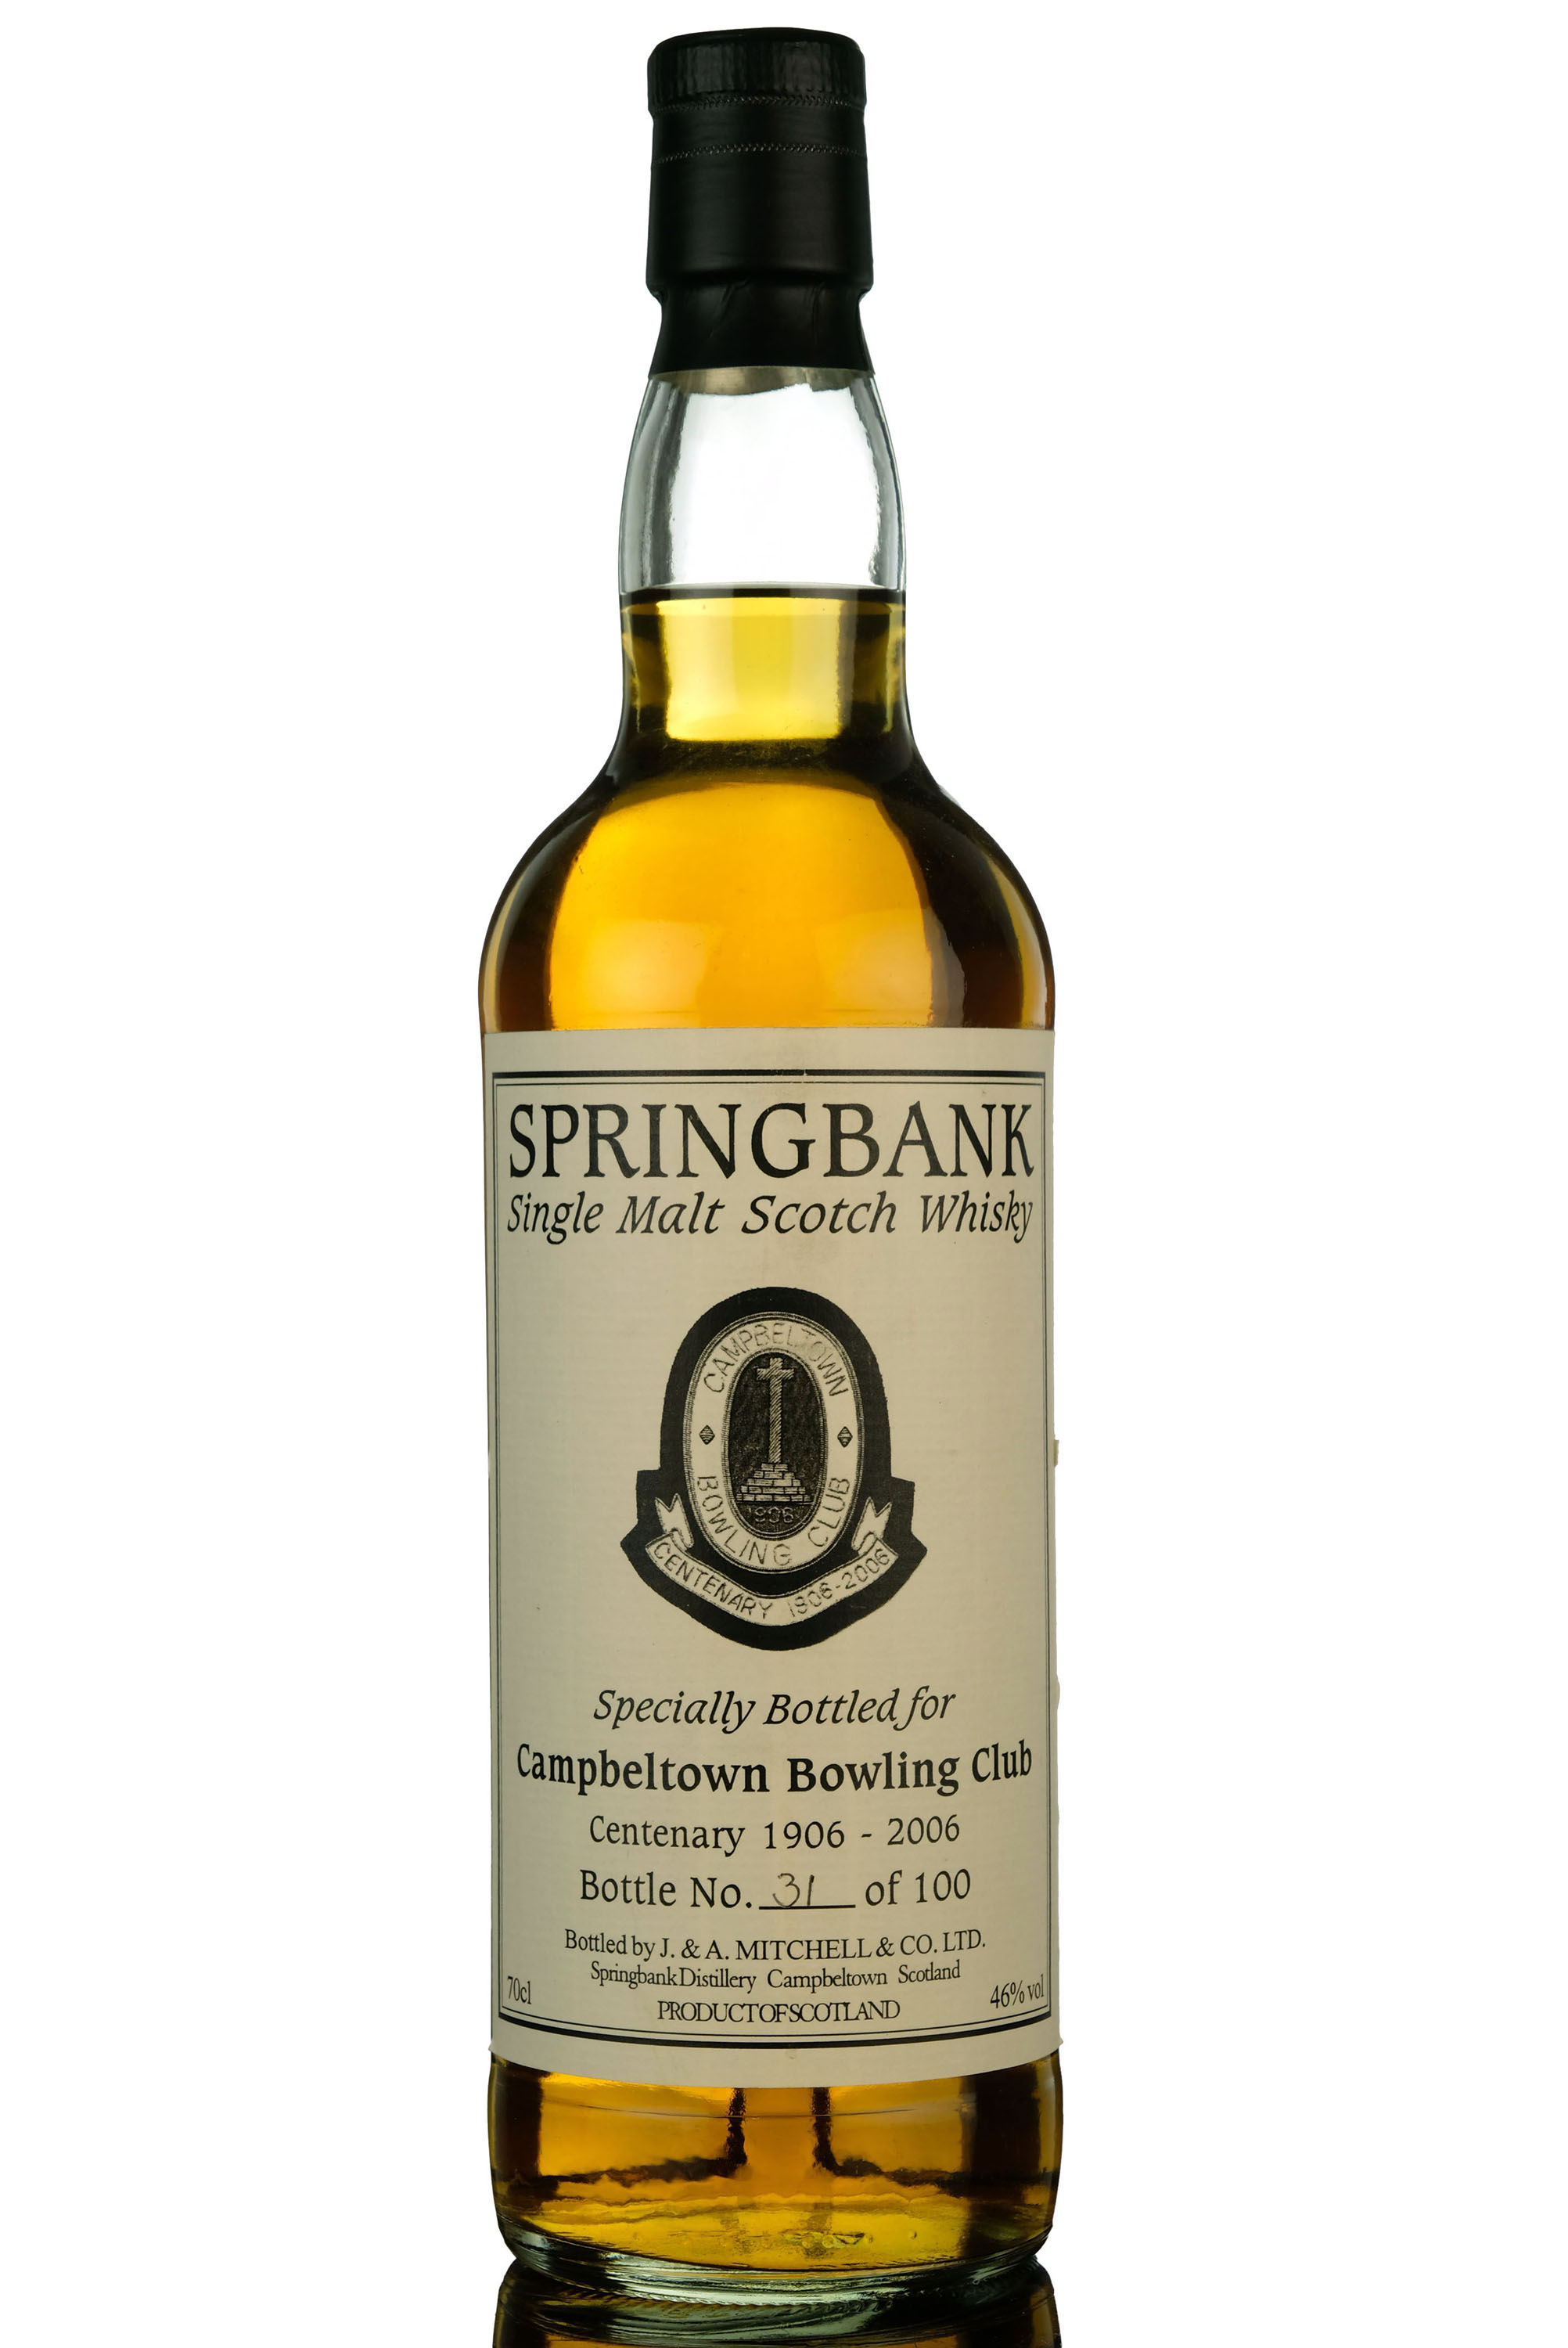 Springbank Specially Selected For Campbeltown Bowling Club Centenary 1906-2006